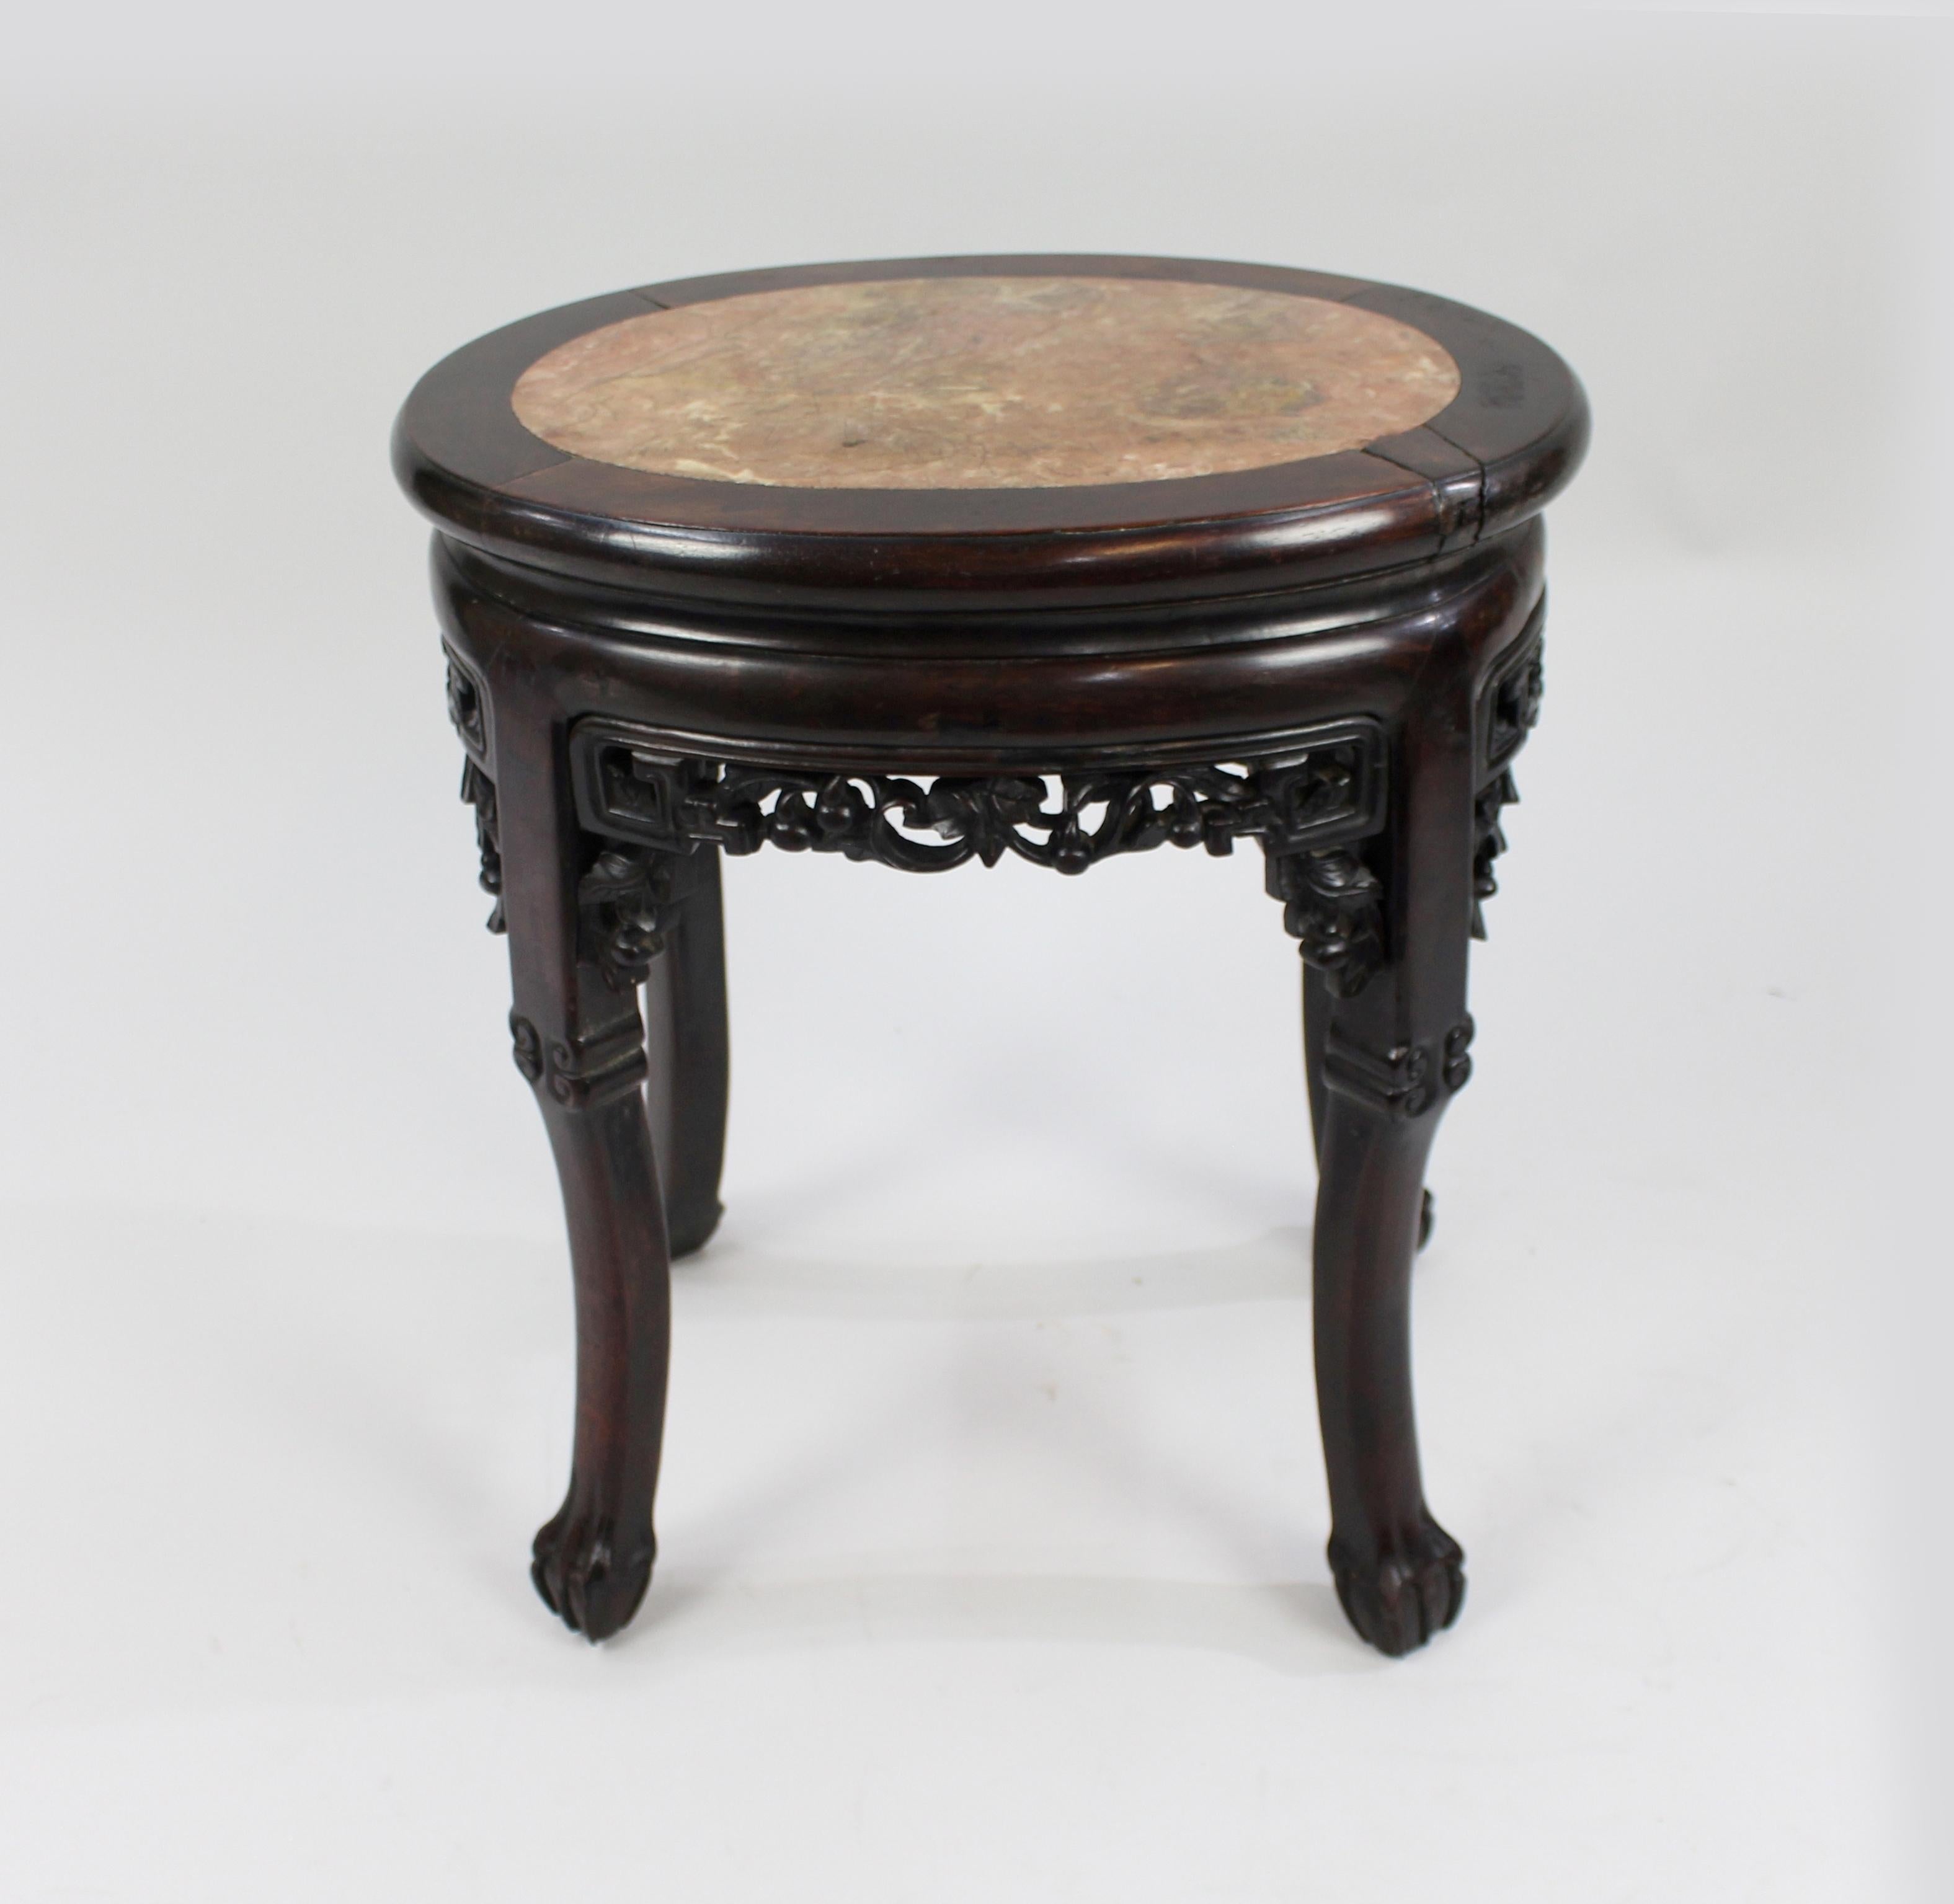 Period 19th century, Chinese
Composition rouge marble top, carved rosewood frame
Condition good condition commensurate with age. Original marble top. Split to wood on top of table as pictured. Section of carving to top of one leg missing as